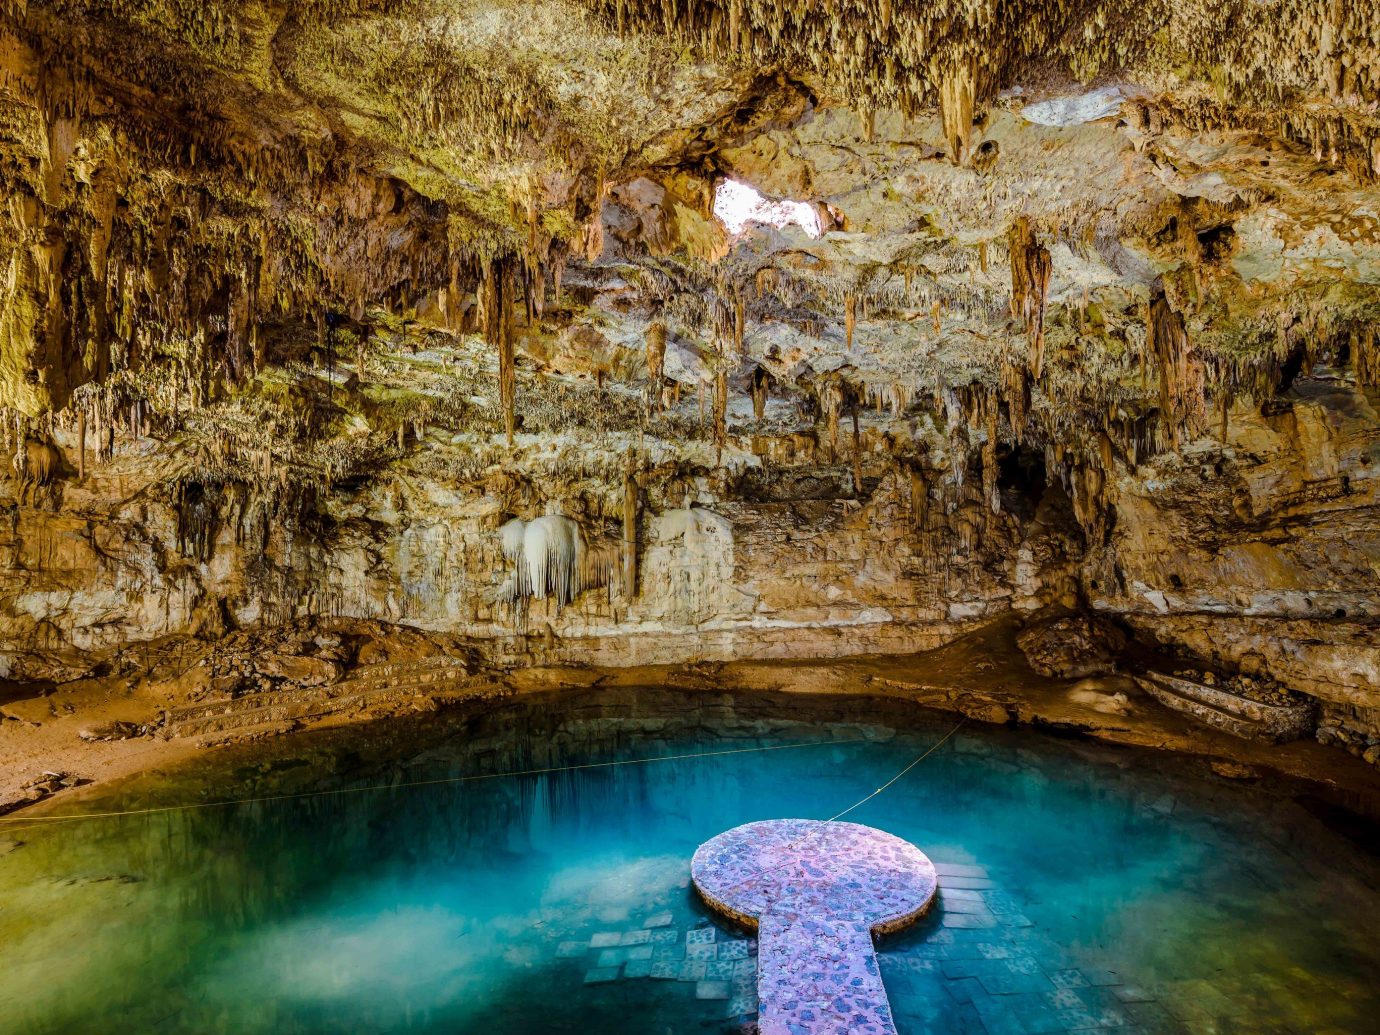 Trip Ideas water outdoor grass Nature reflection formation cave rock underground lake pond watercourse water resources geology mineral spring water feature landscape sea cave swimming